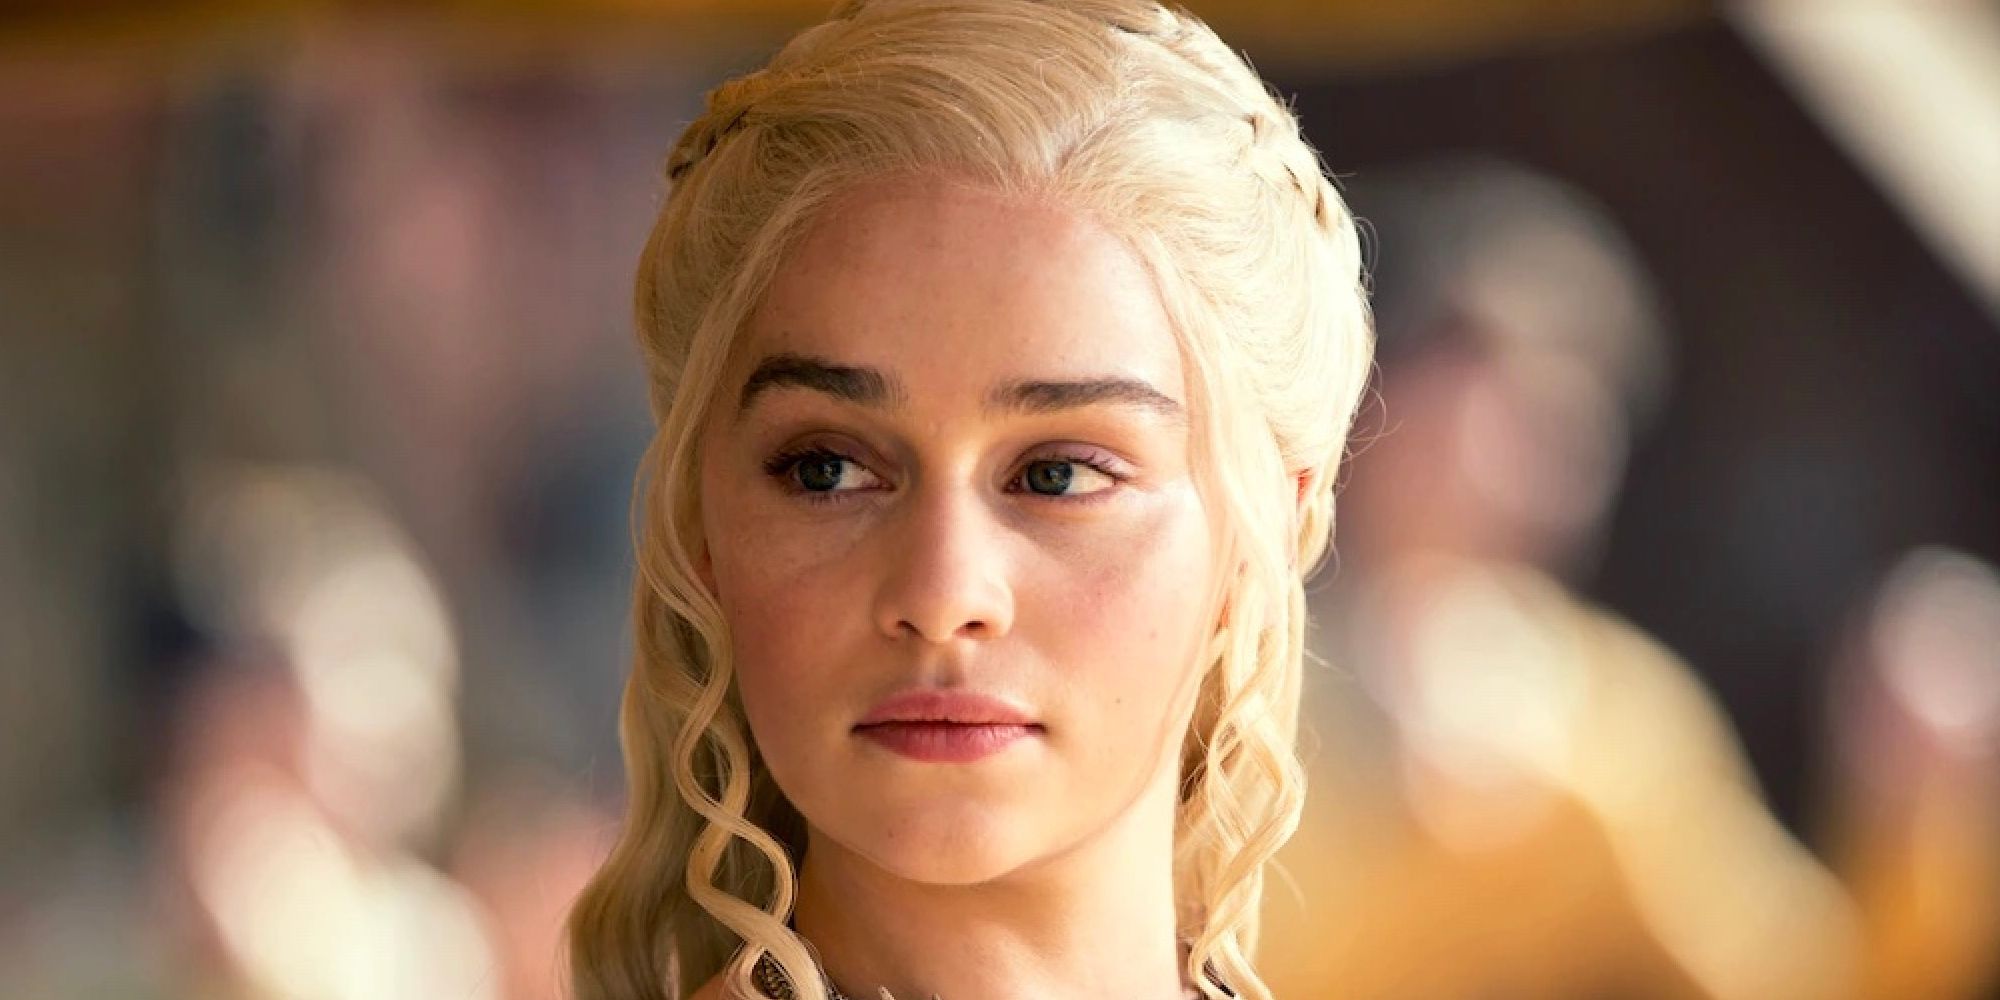 Daenerys Targaryen, played by Emilia Clarke, looks to the left in Game of Thrones